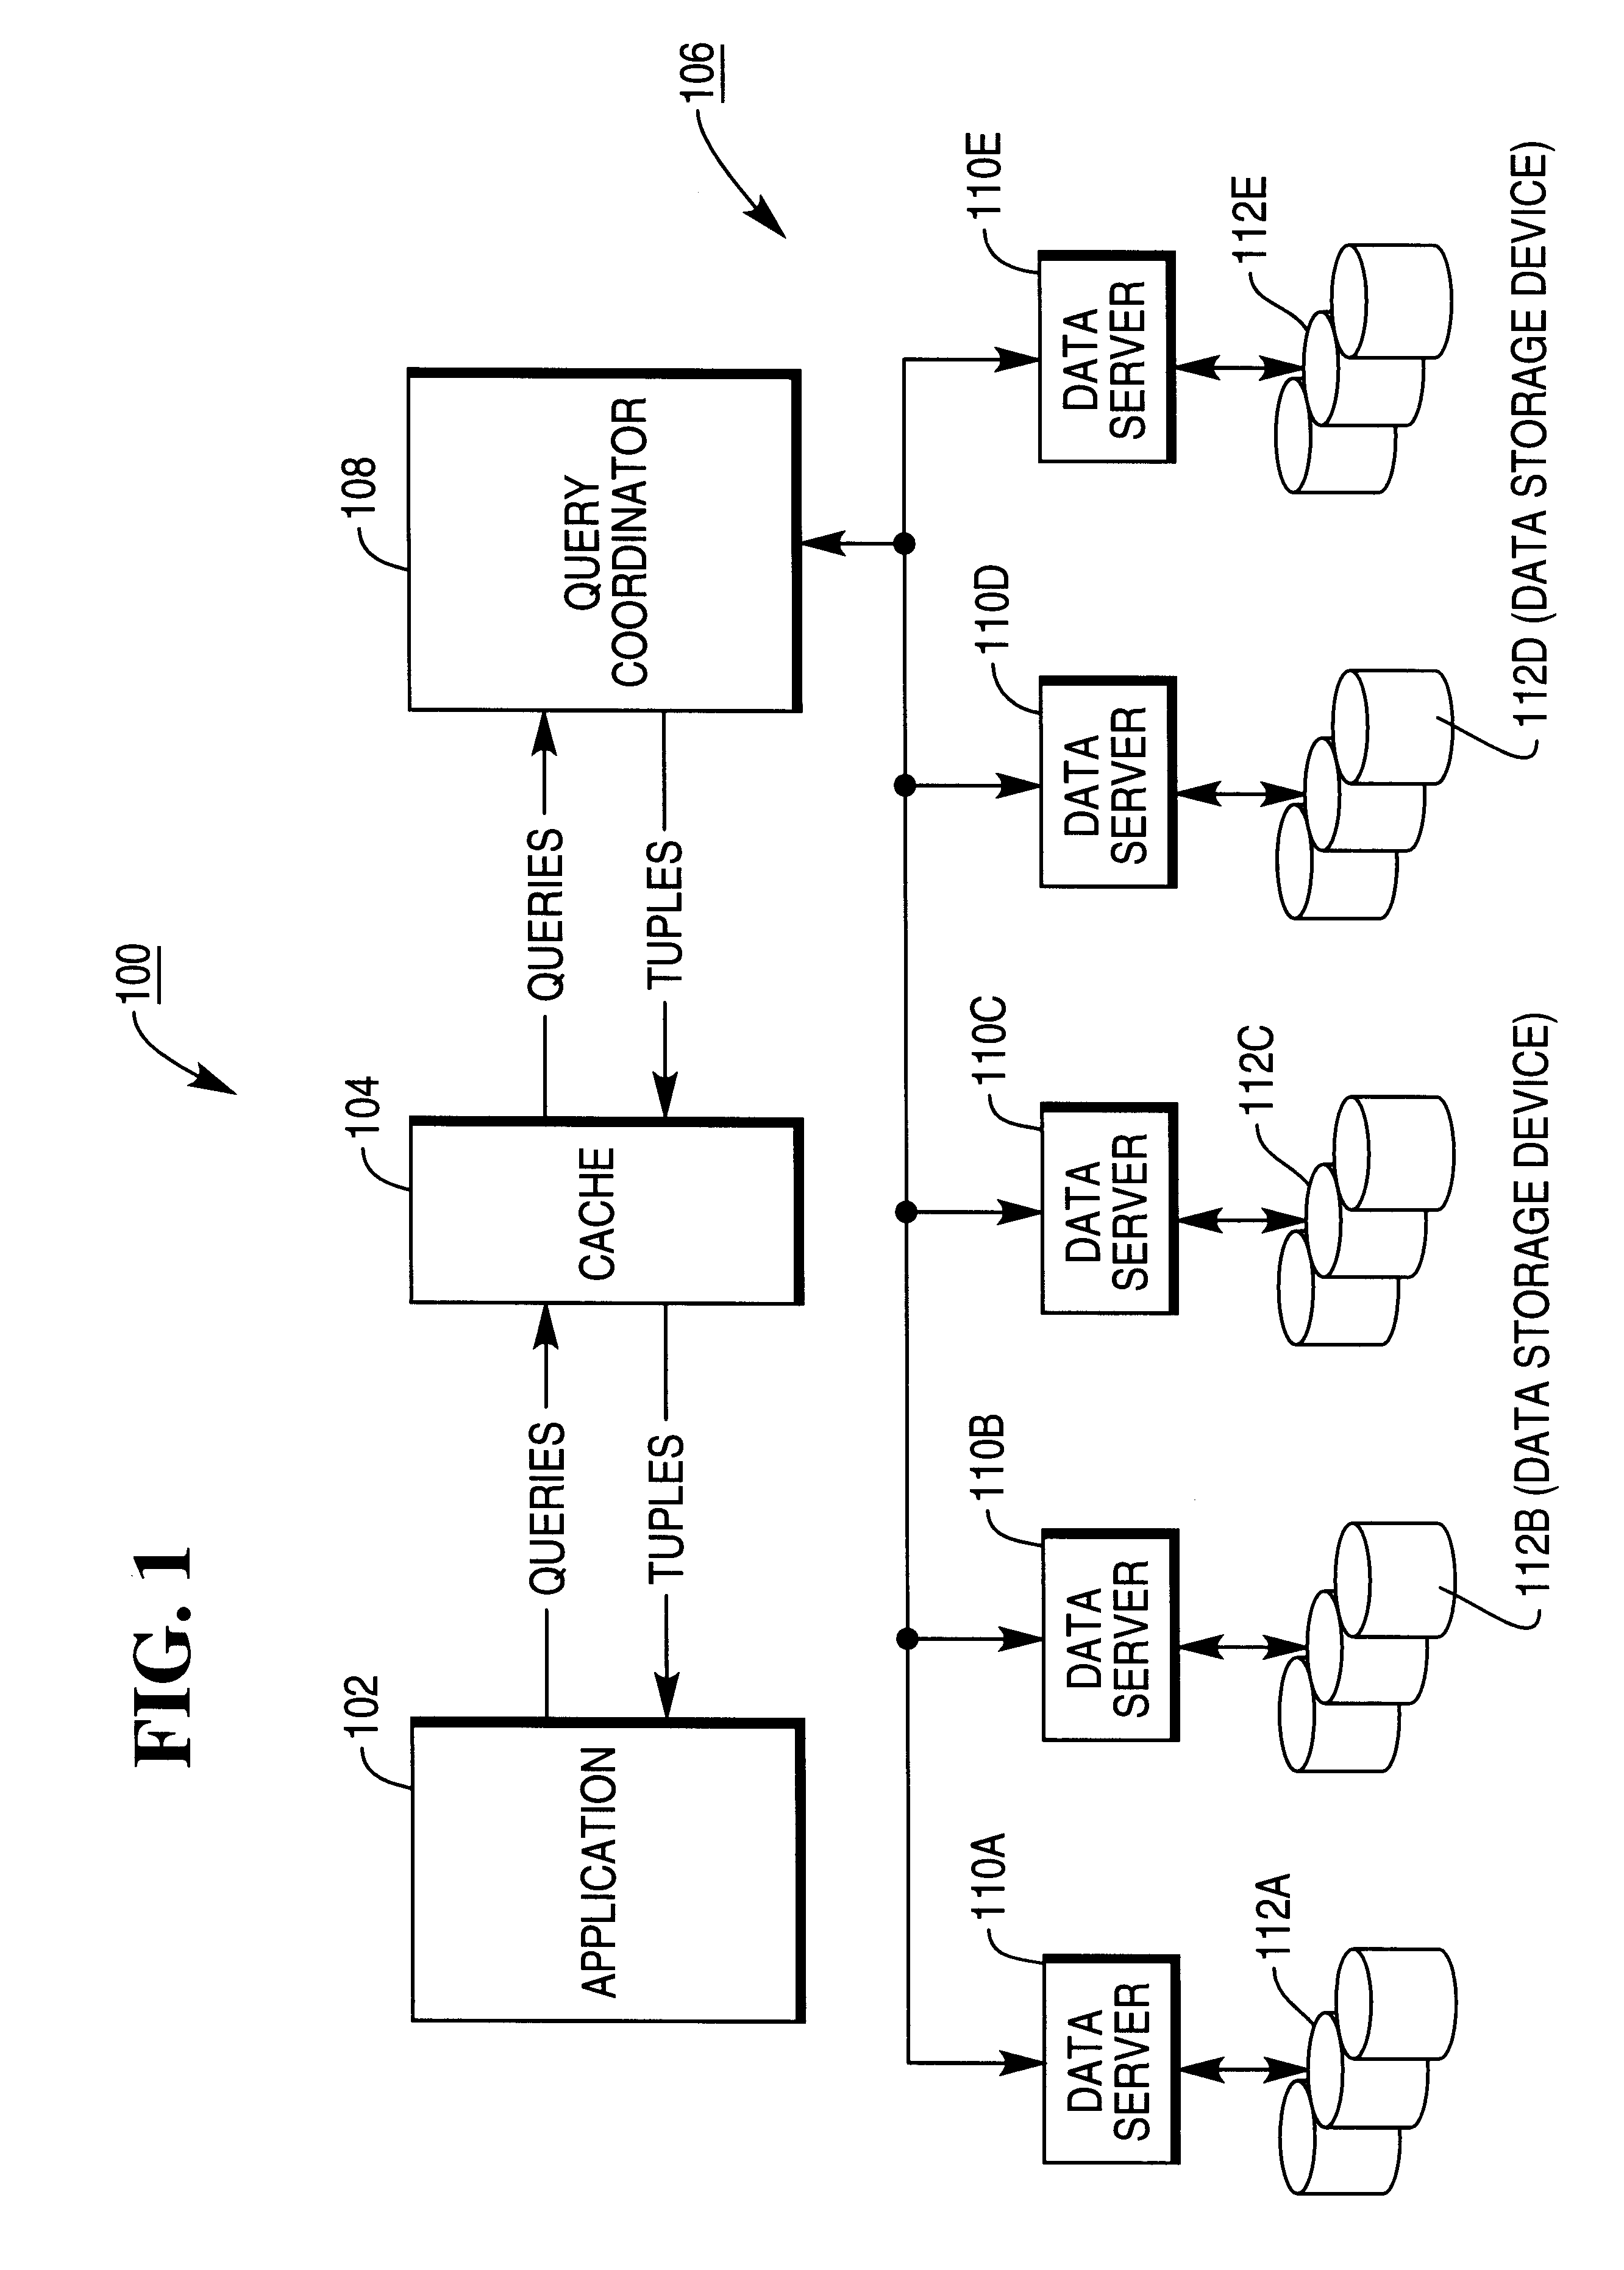 Simultaneous computation of multiple moving aggregates in a relational database management system